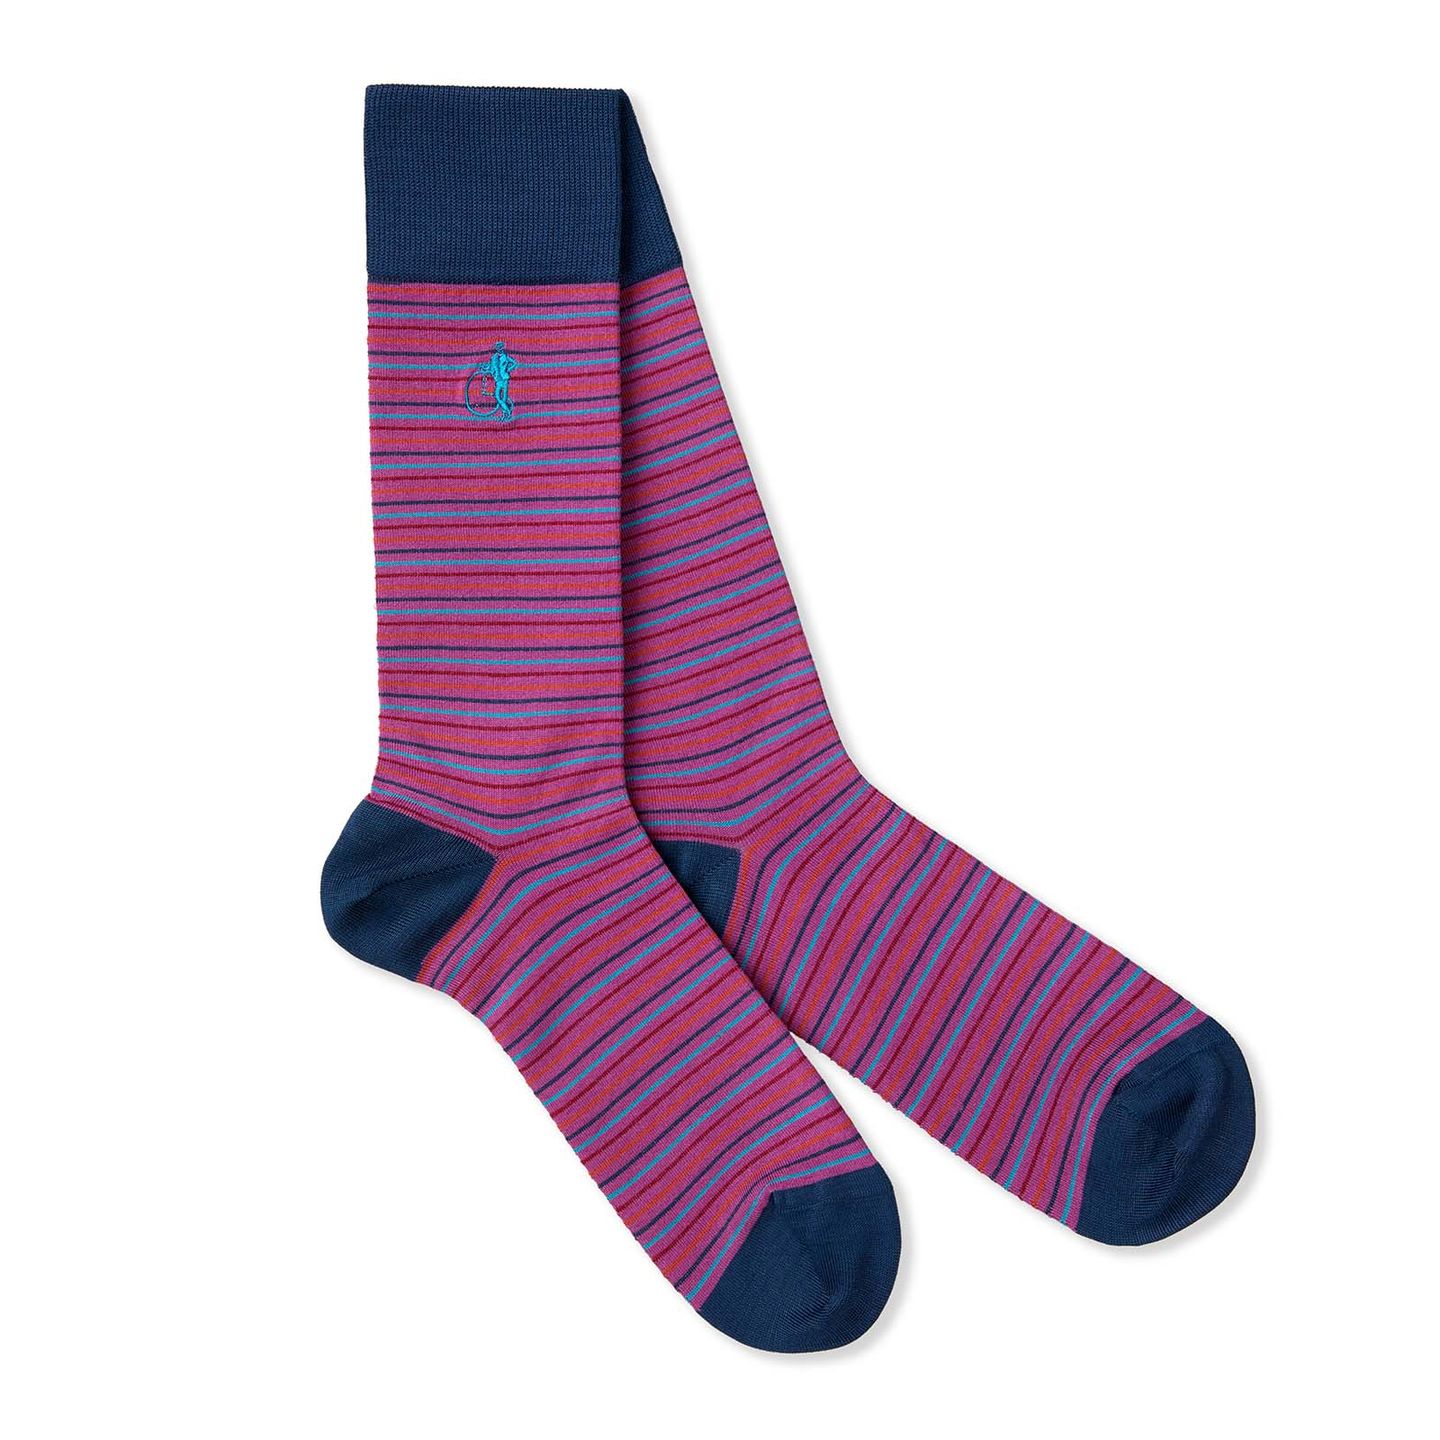 Pink stripped socks with various blue and red lines from Ilara collection